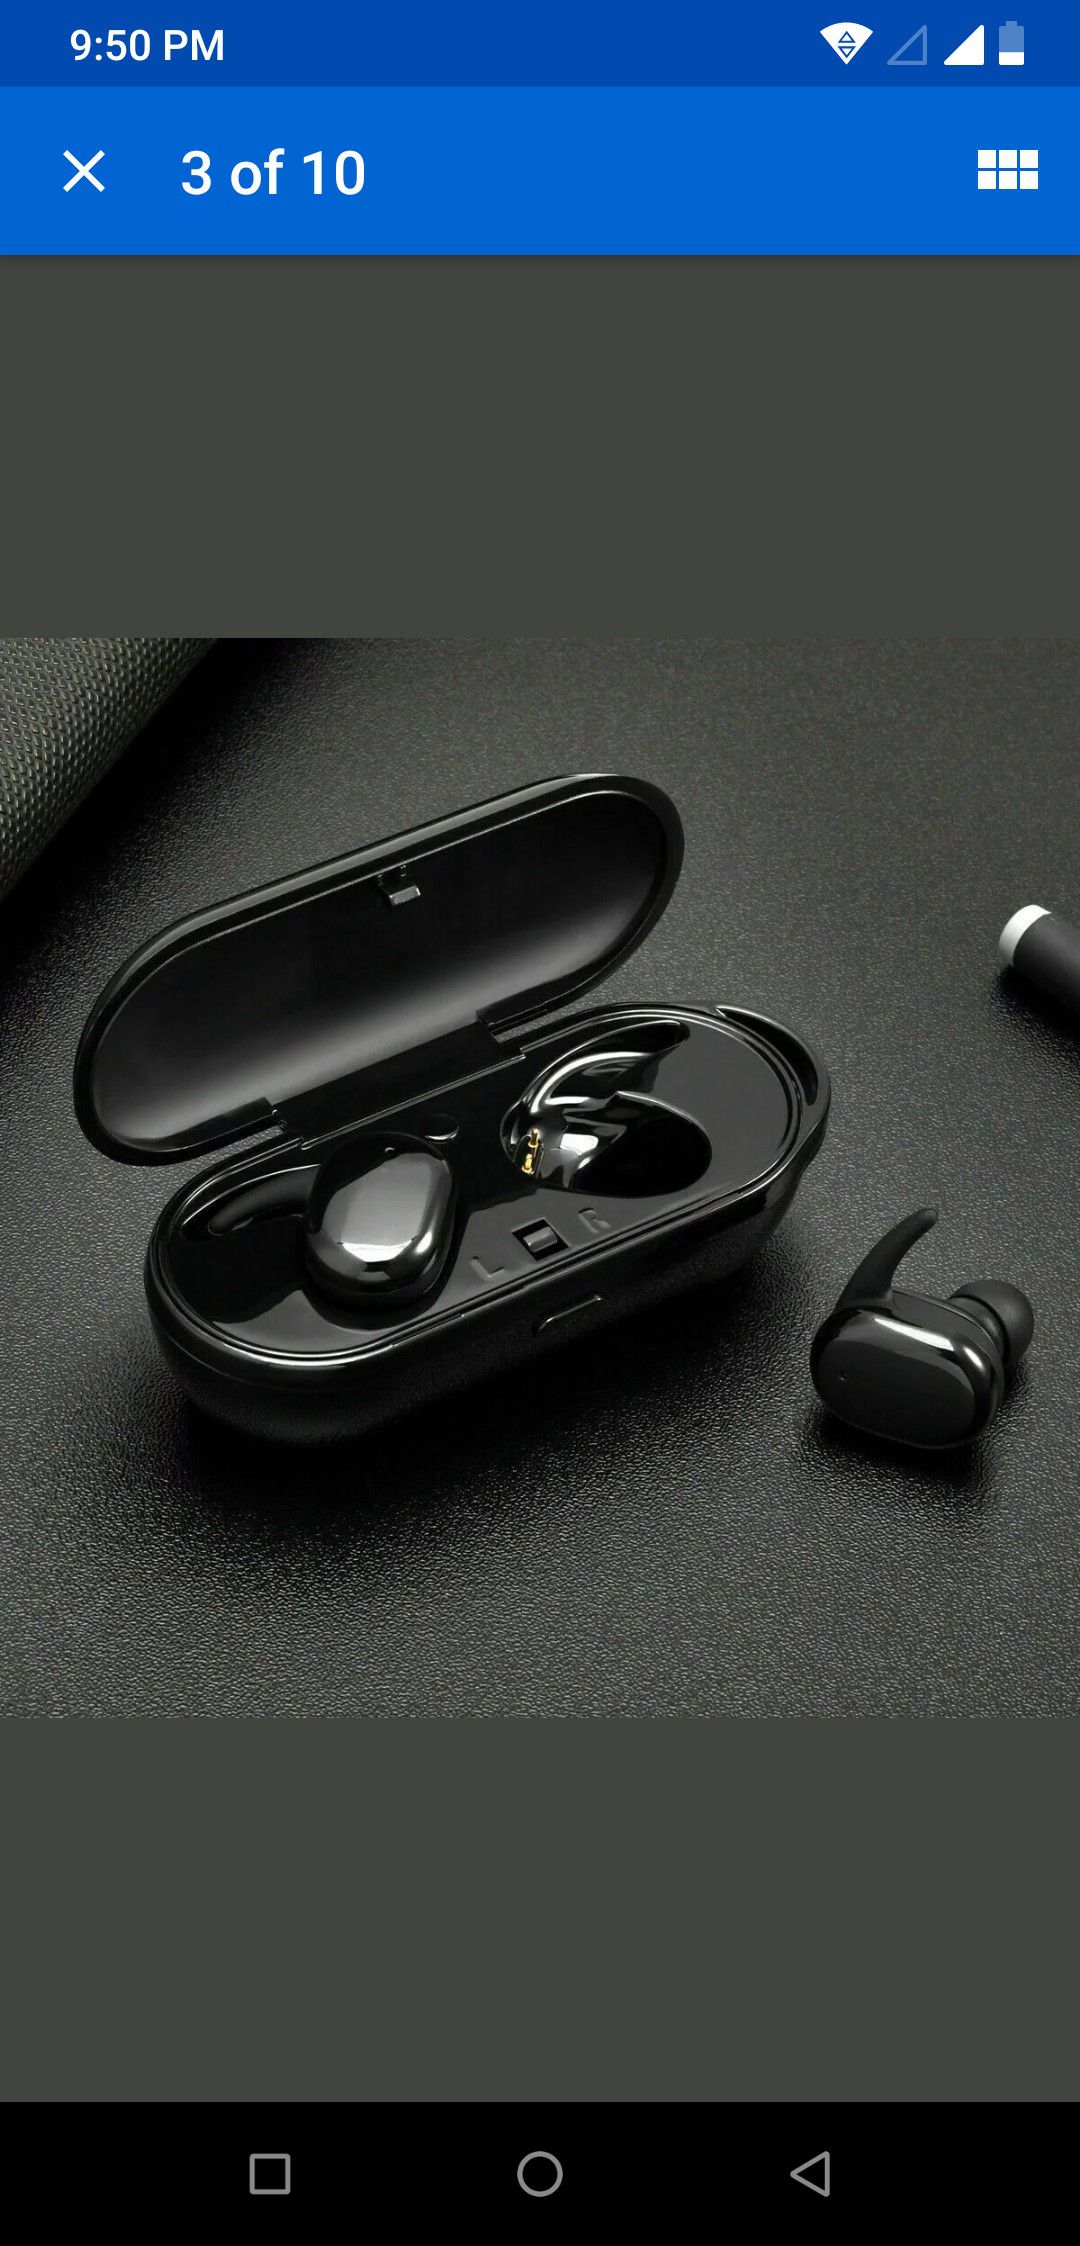 Wireless bluetooth airpods headset noise cancellation touch control for iphone and Android